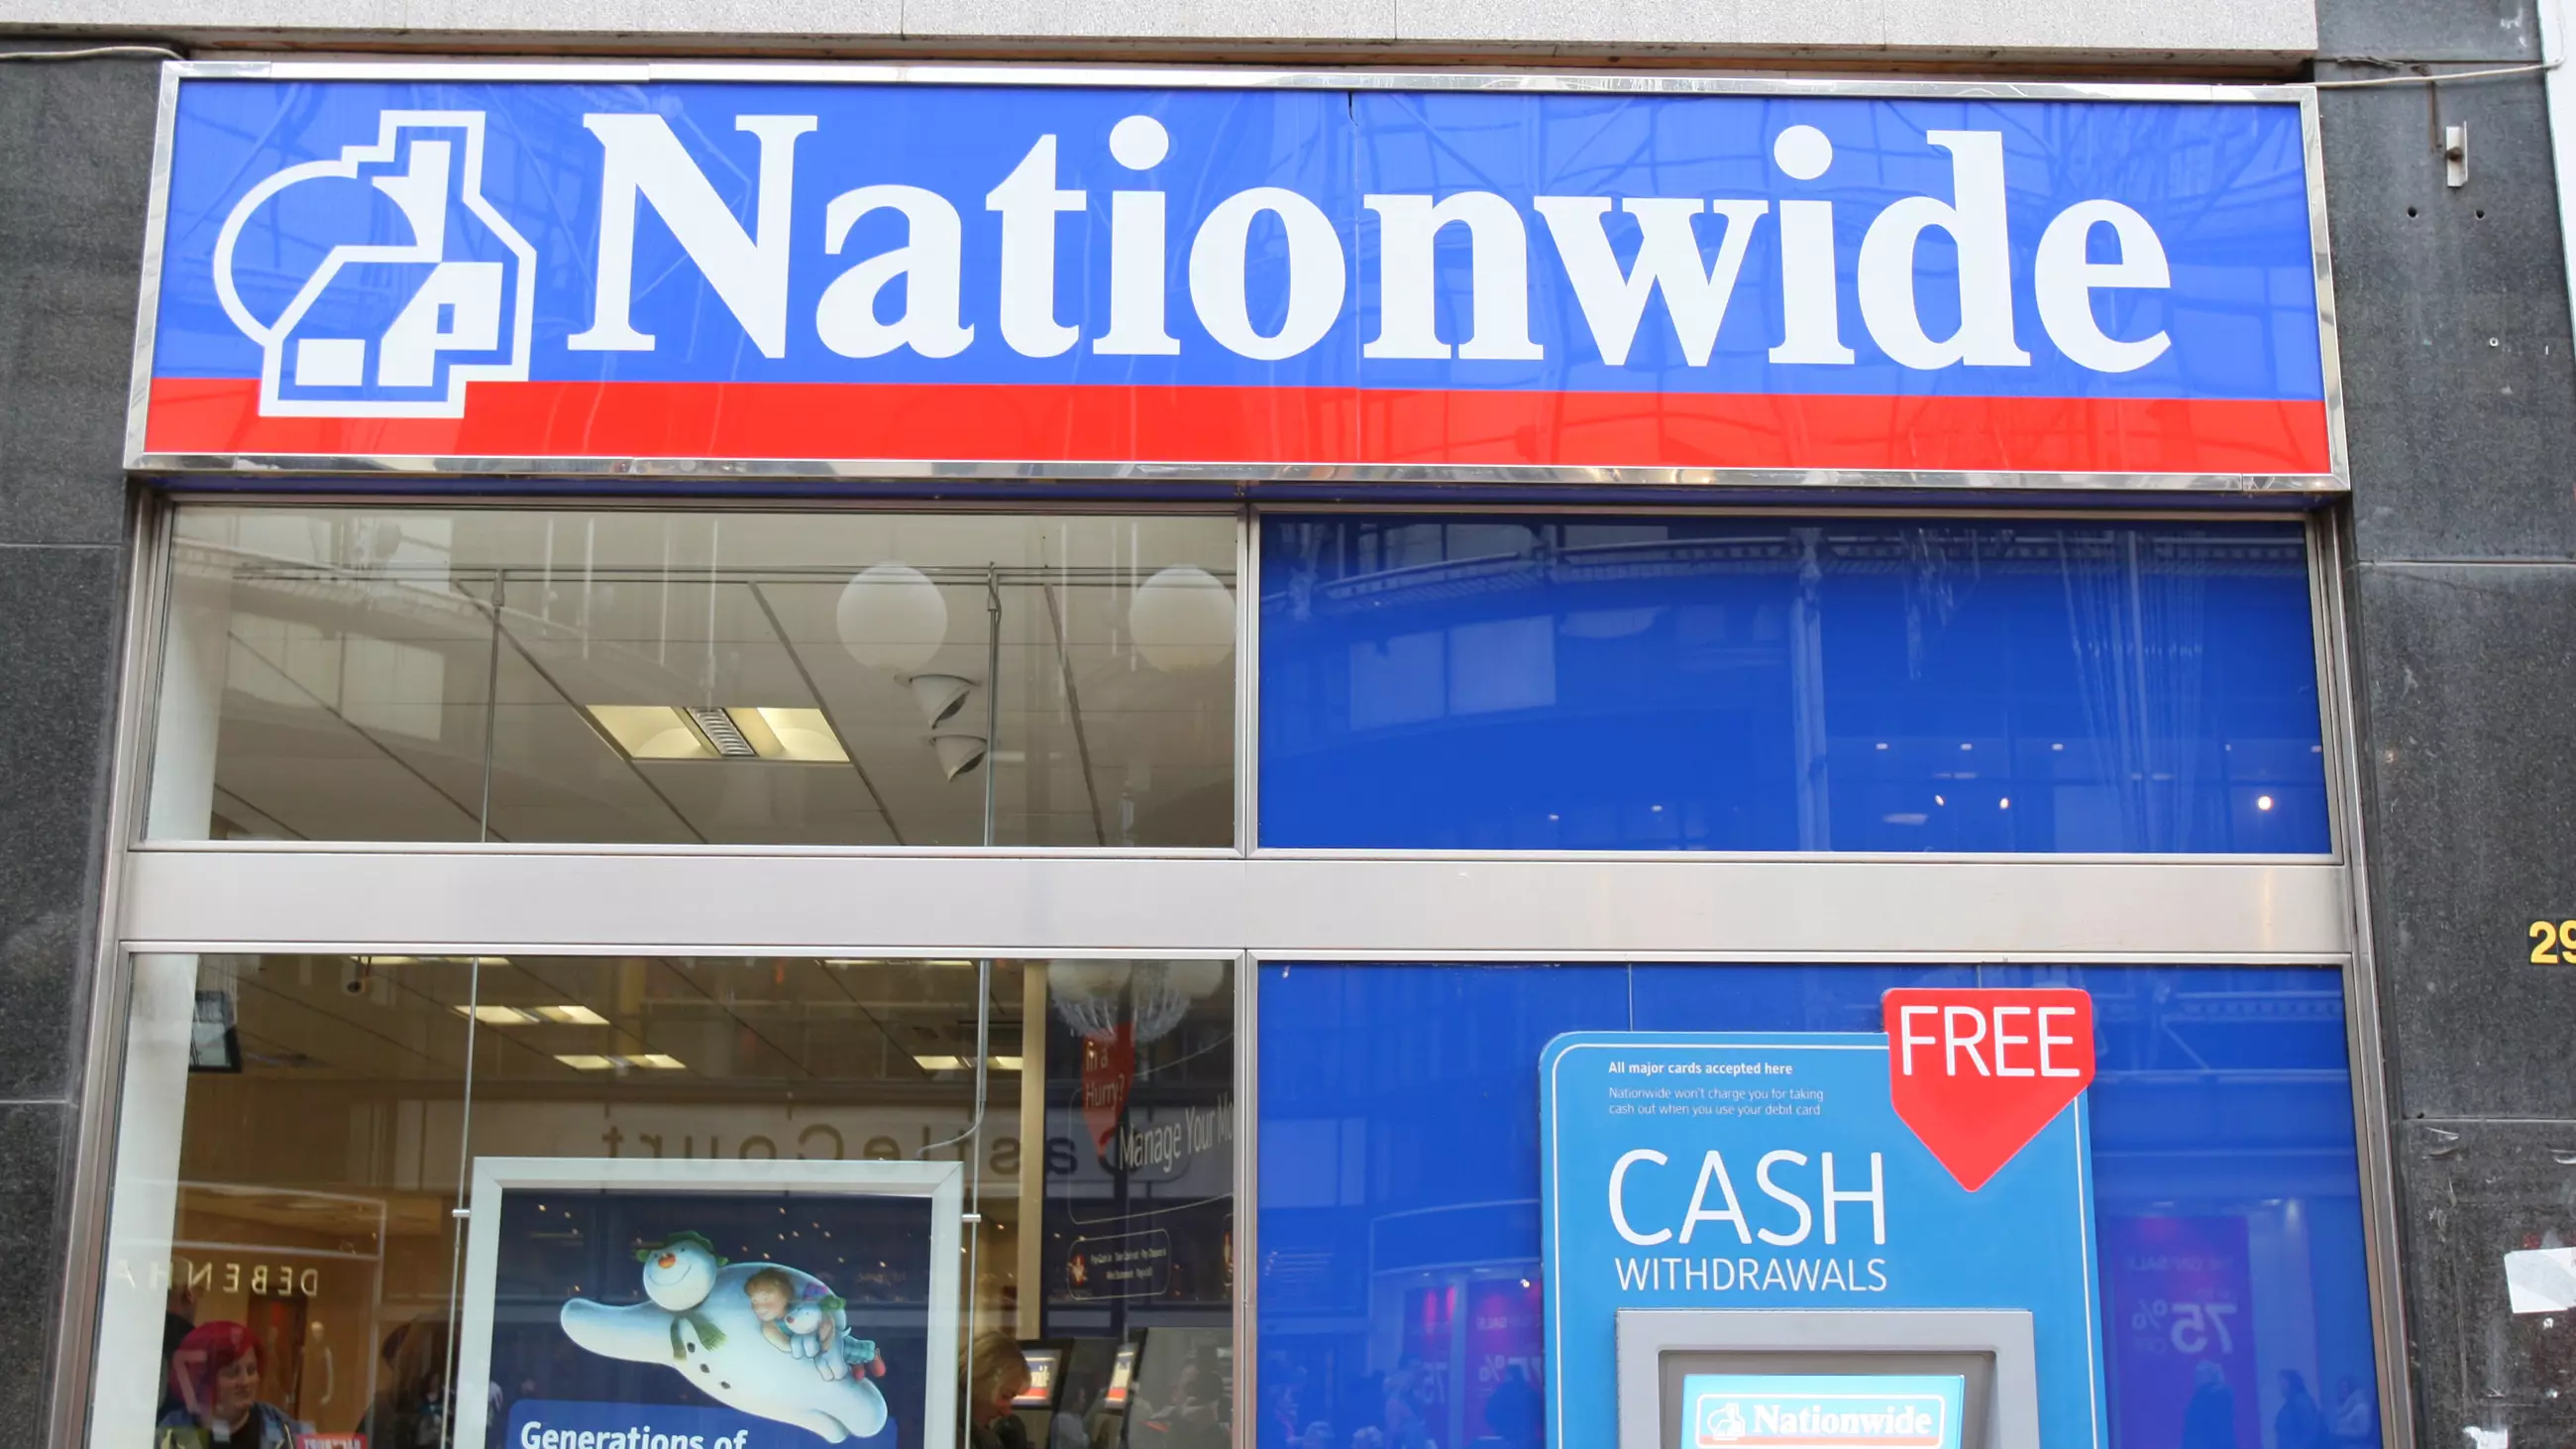 Nationwide Cheque Mistake Leaves Teenager With An £8.9m Bank Balance